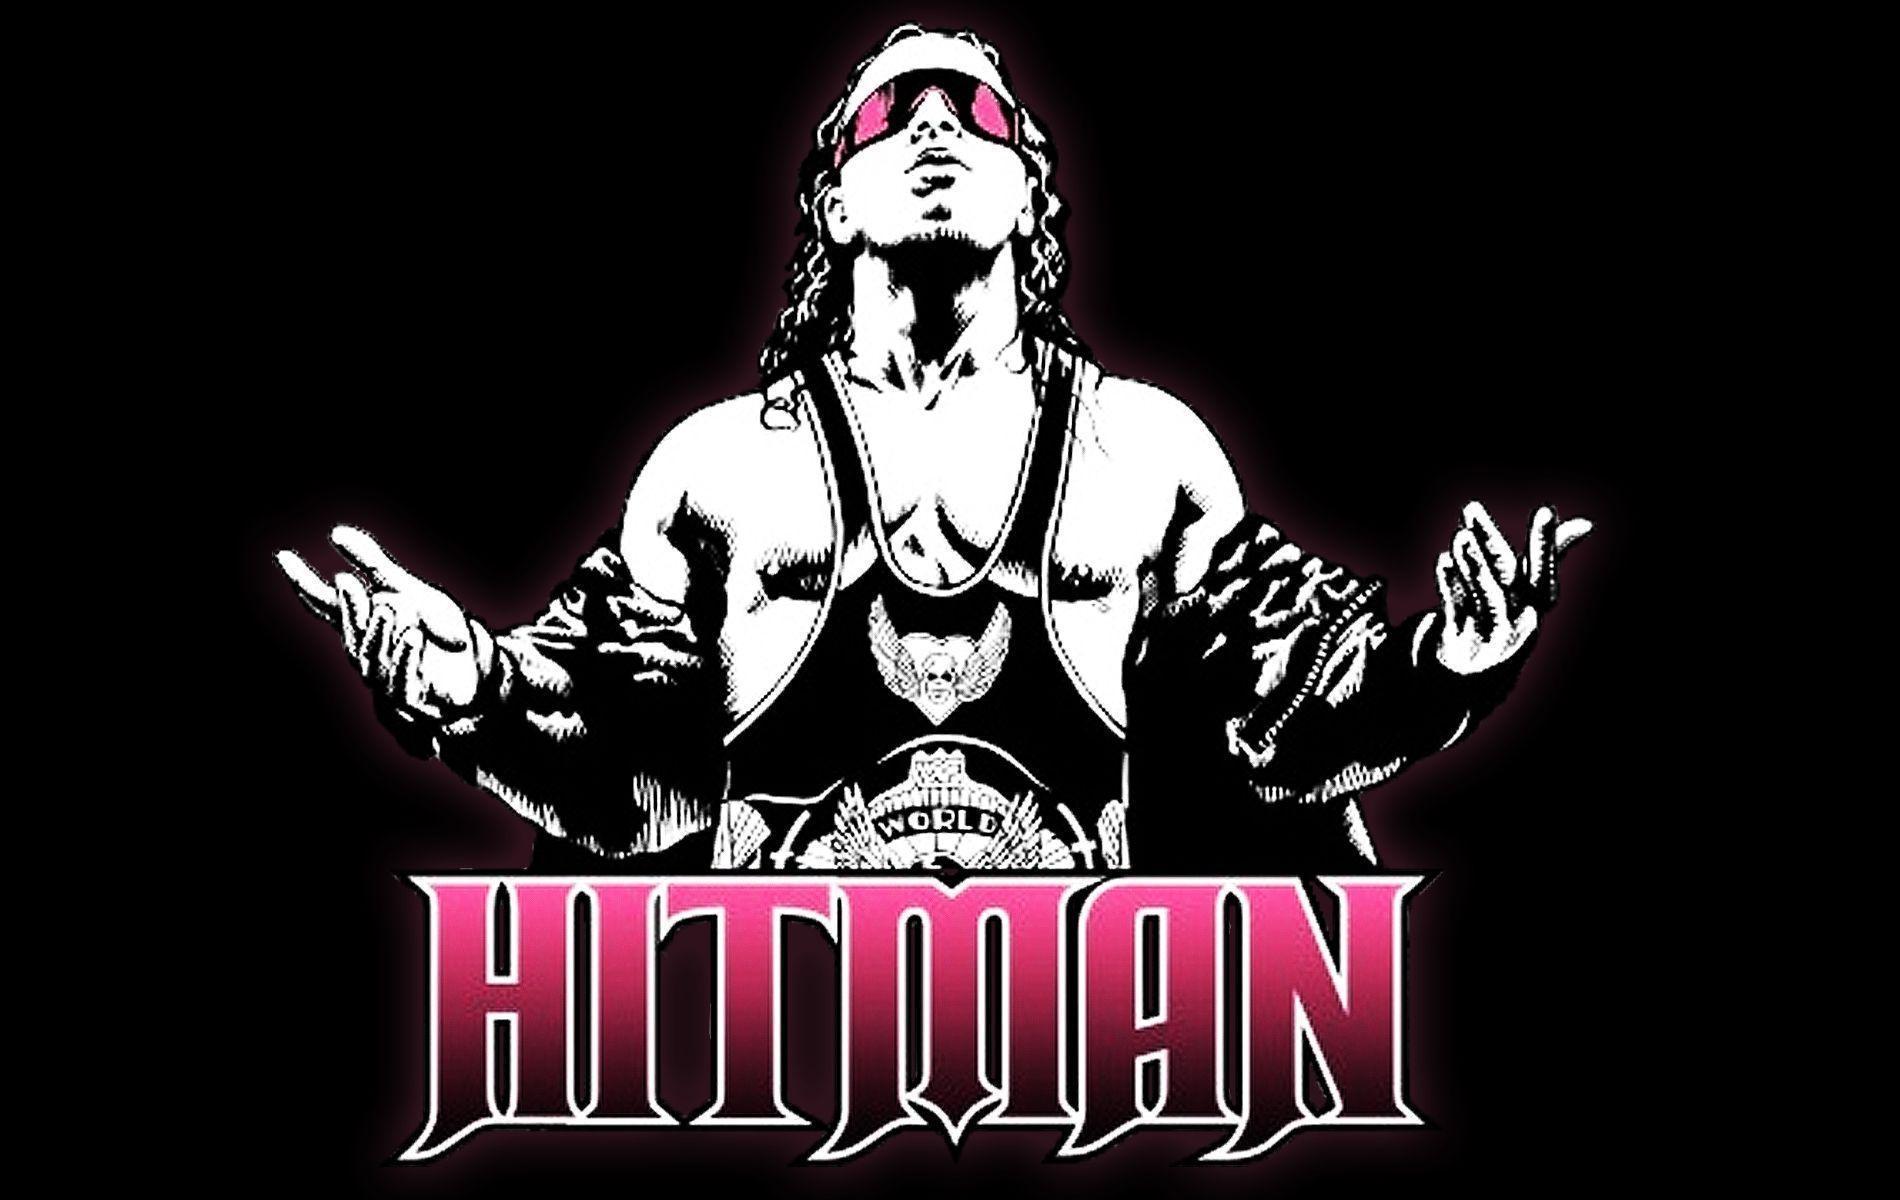 New Bret Hart Wallpapers APK for Android Download